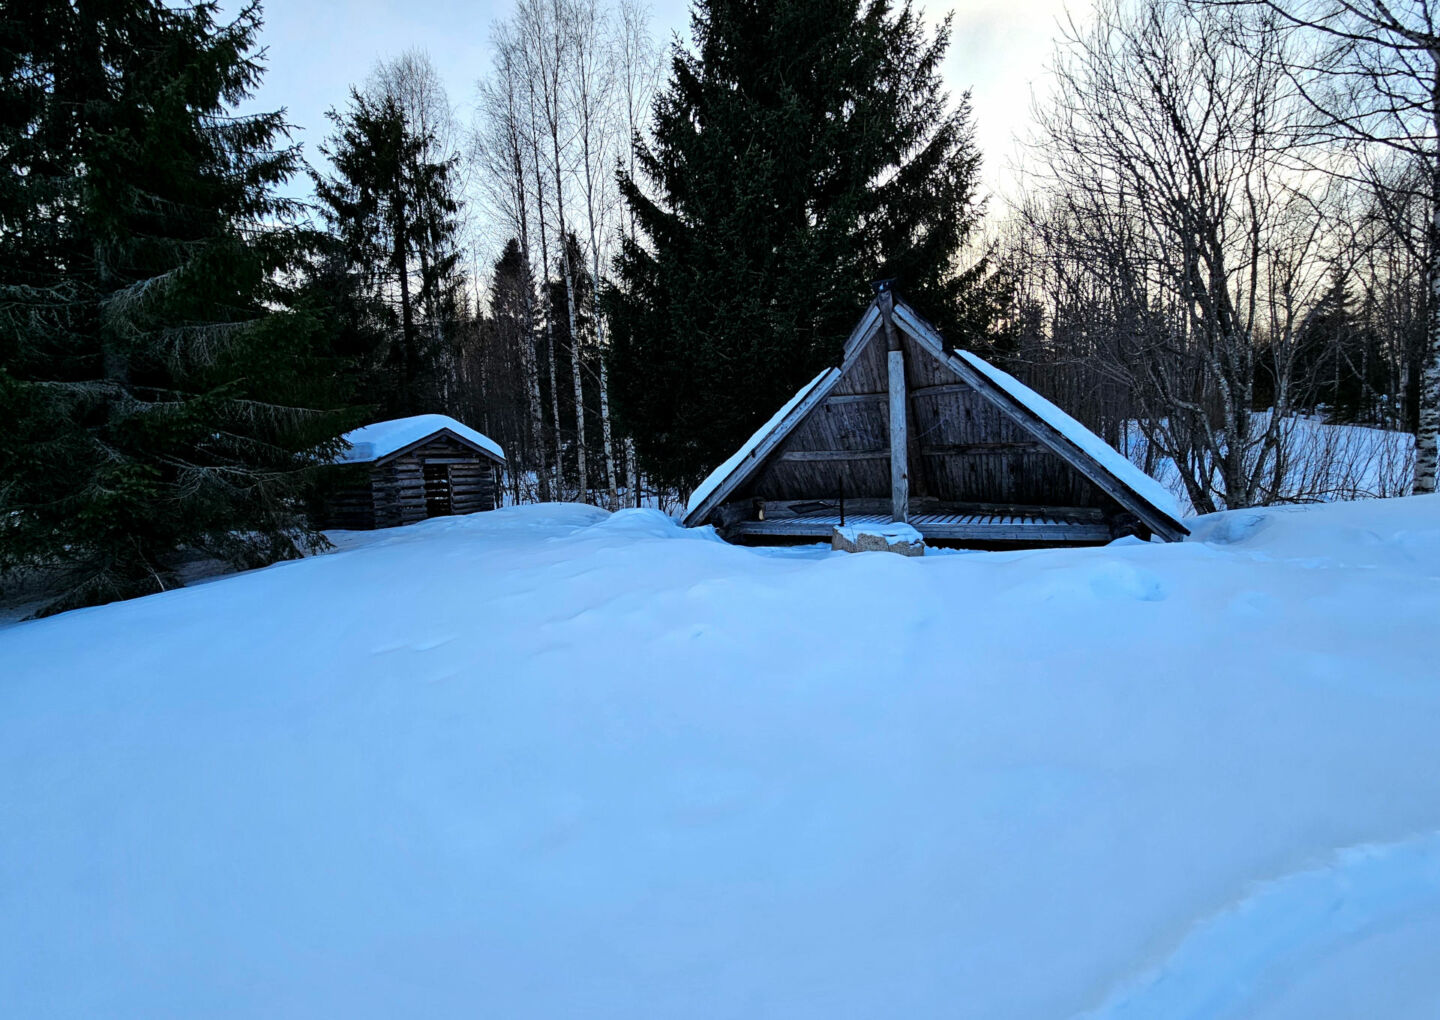 A winter view from a campfire laavu (hut) in Tervola, a riverside haven travel destination in Finnish Lapland